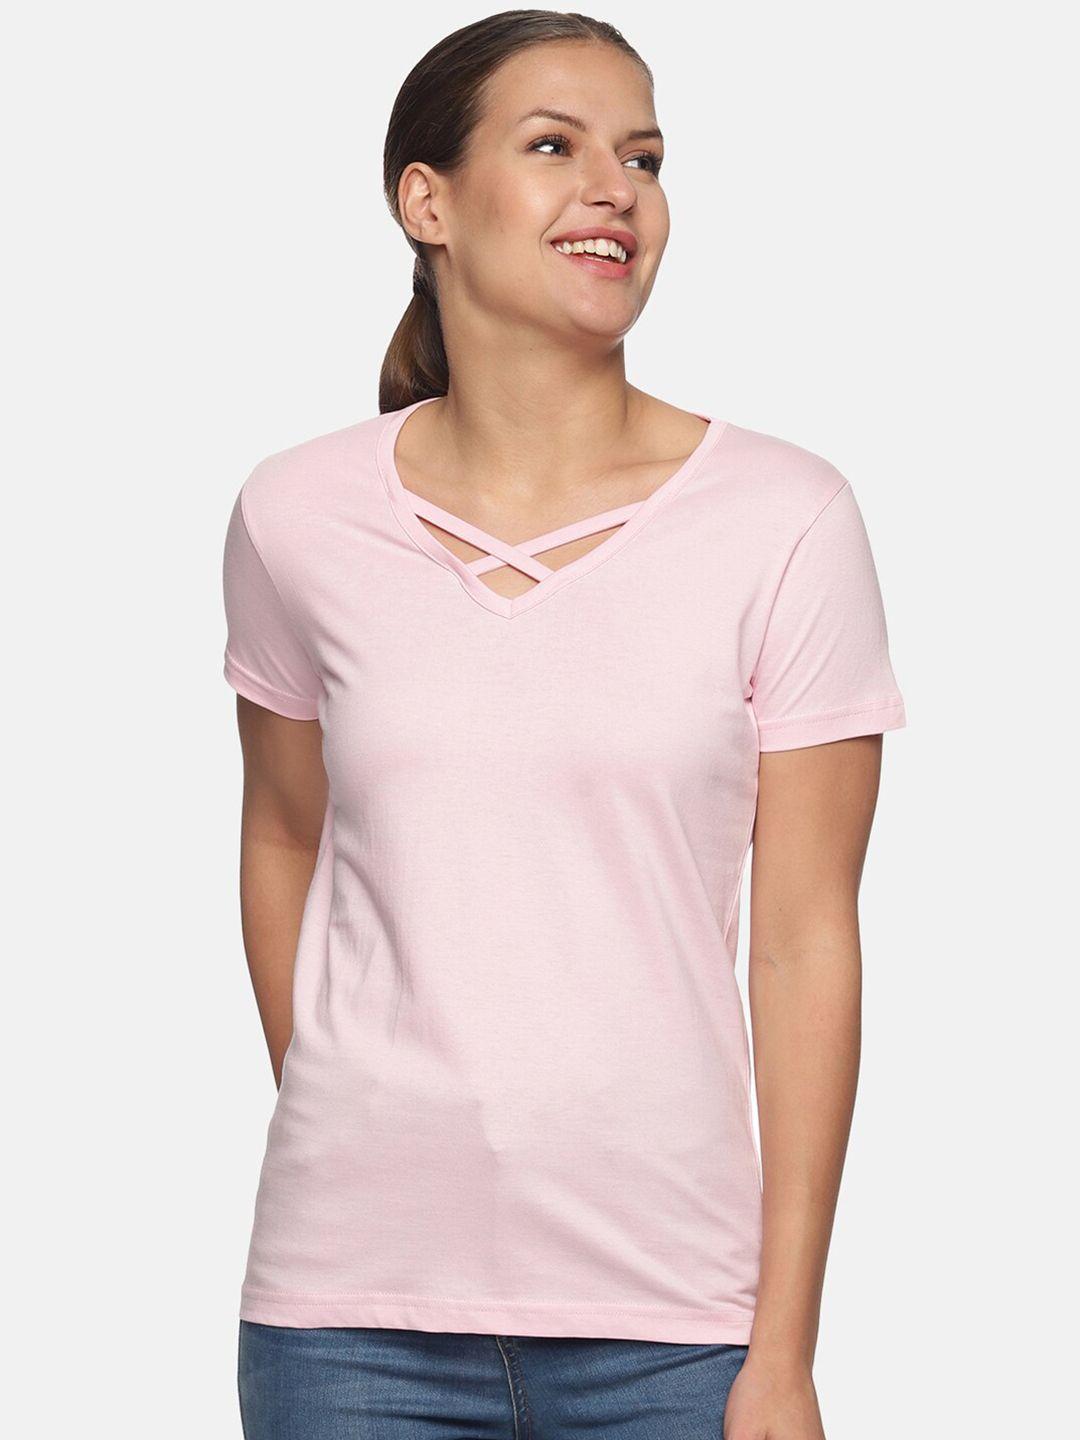 trends tower women pink v-neck pure cotton t-shirt